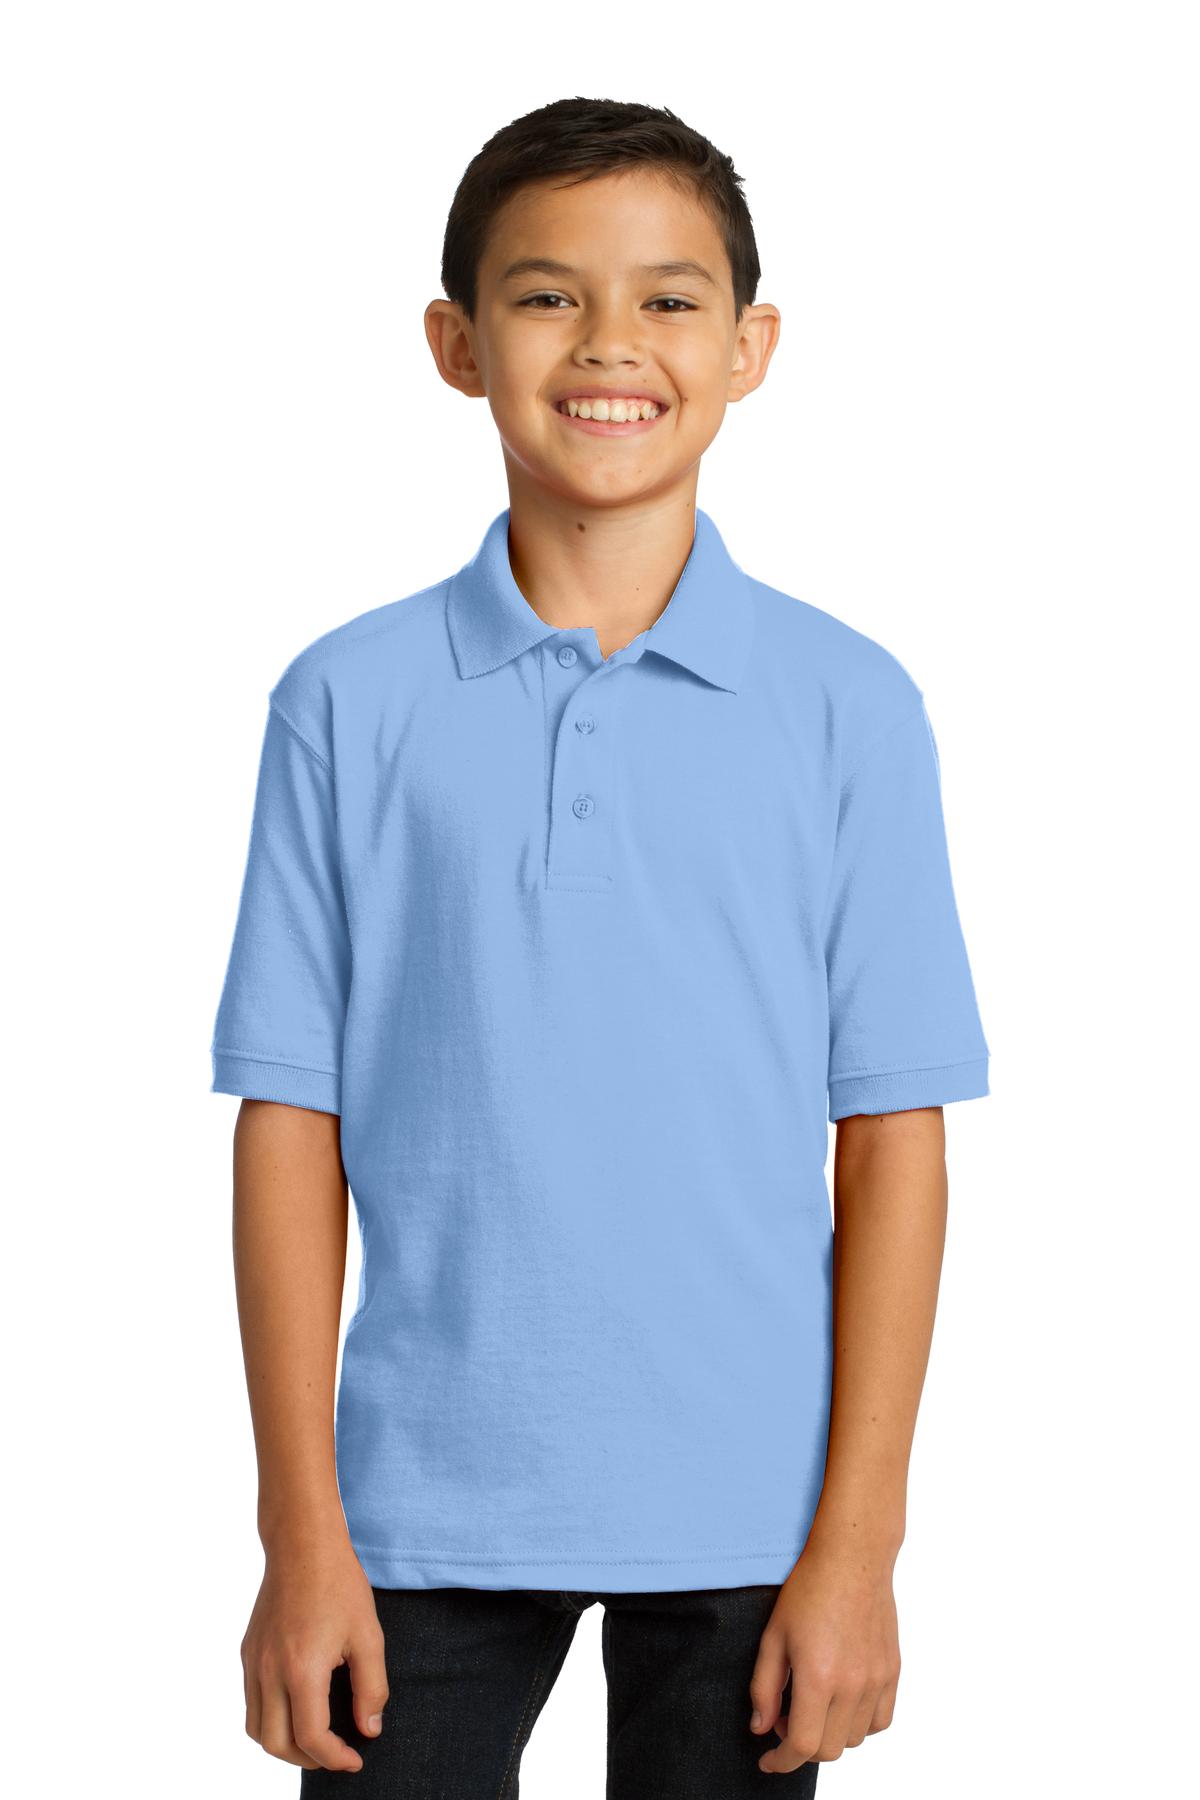 Port & Company Youth Core Blend Jersey Knit Polo. KP55Y